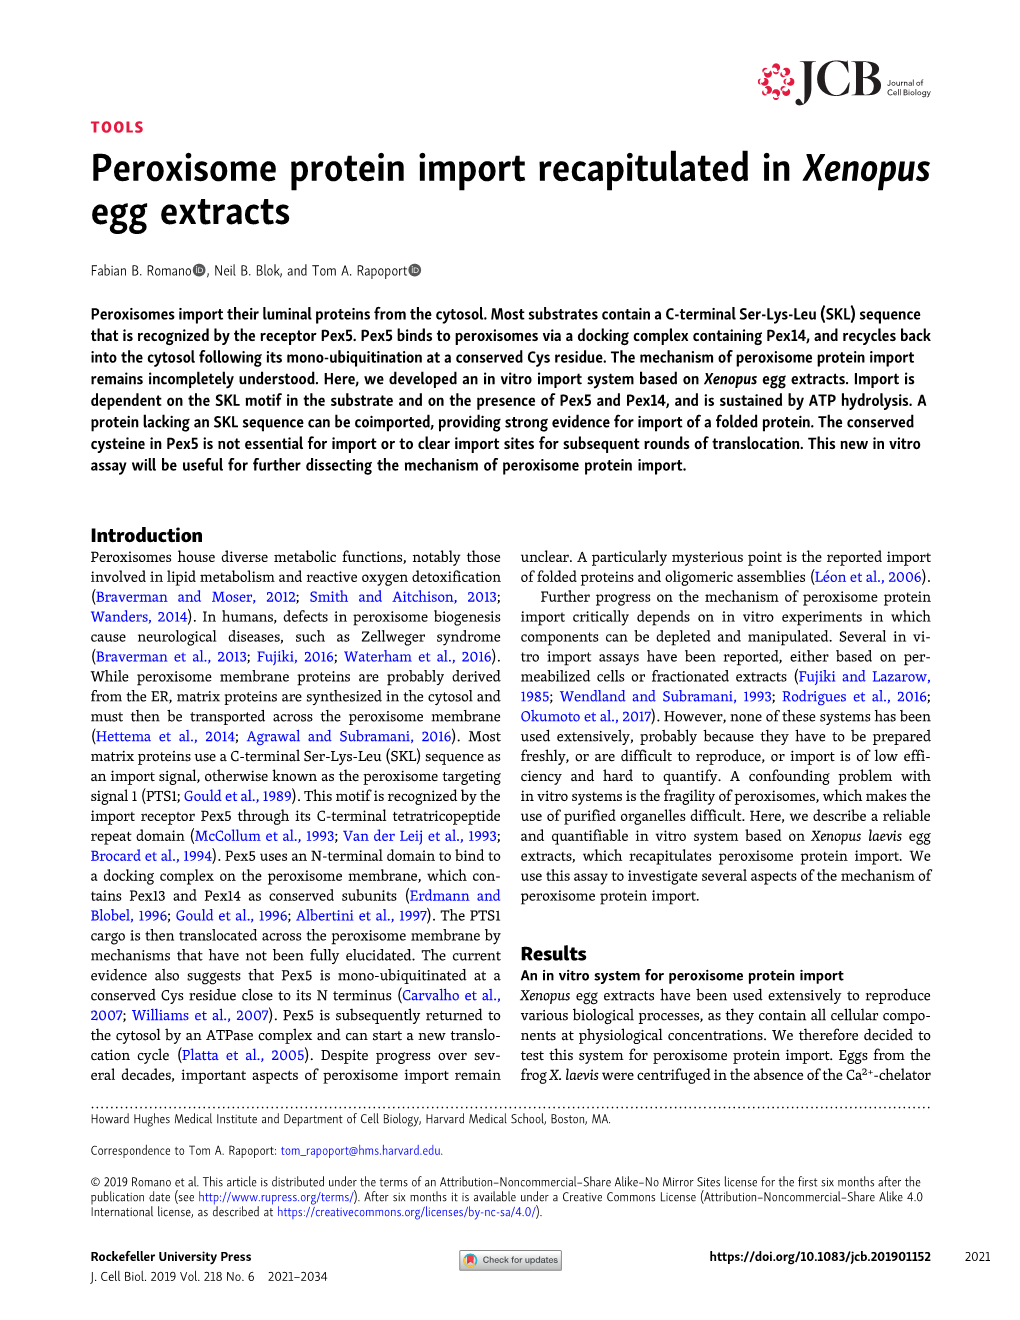 Peroxisome Protein Import Recapitulated in Xenopus Egg Extracts